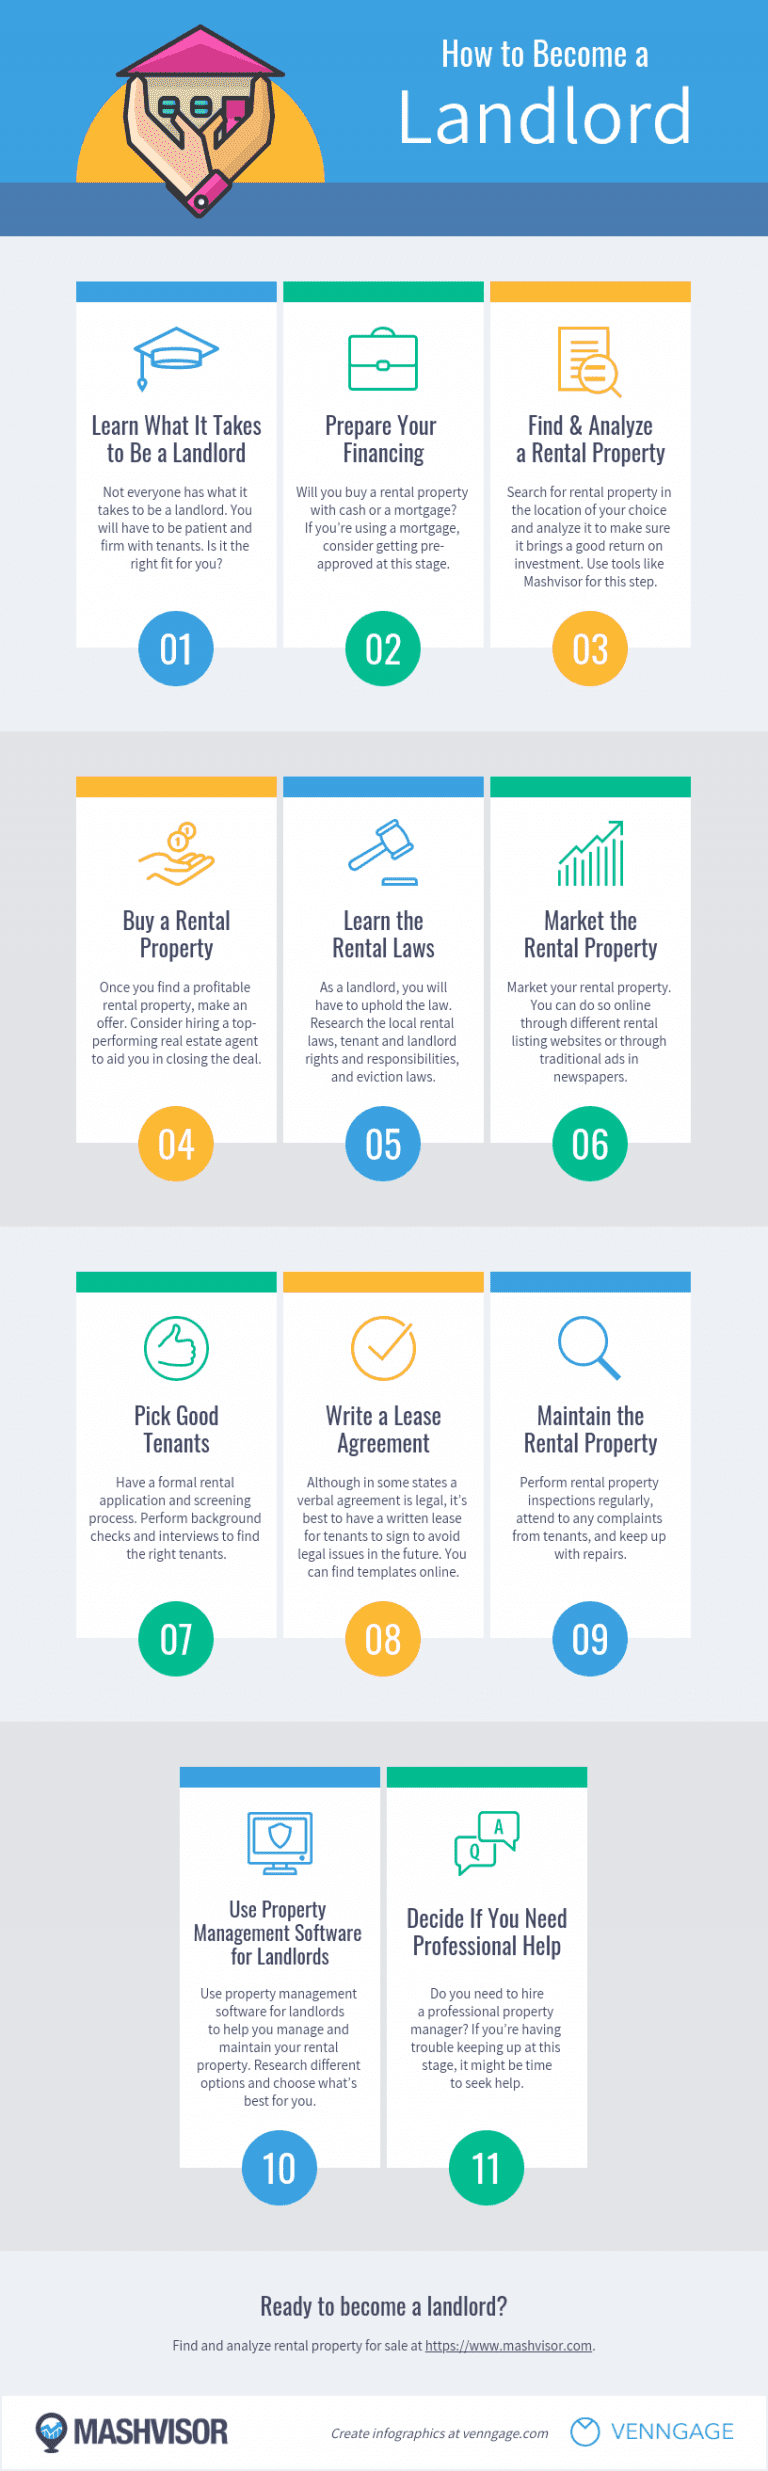 How to Become a Landlord - Infographic